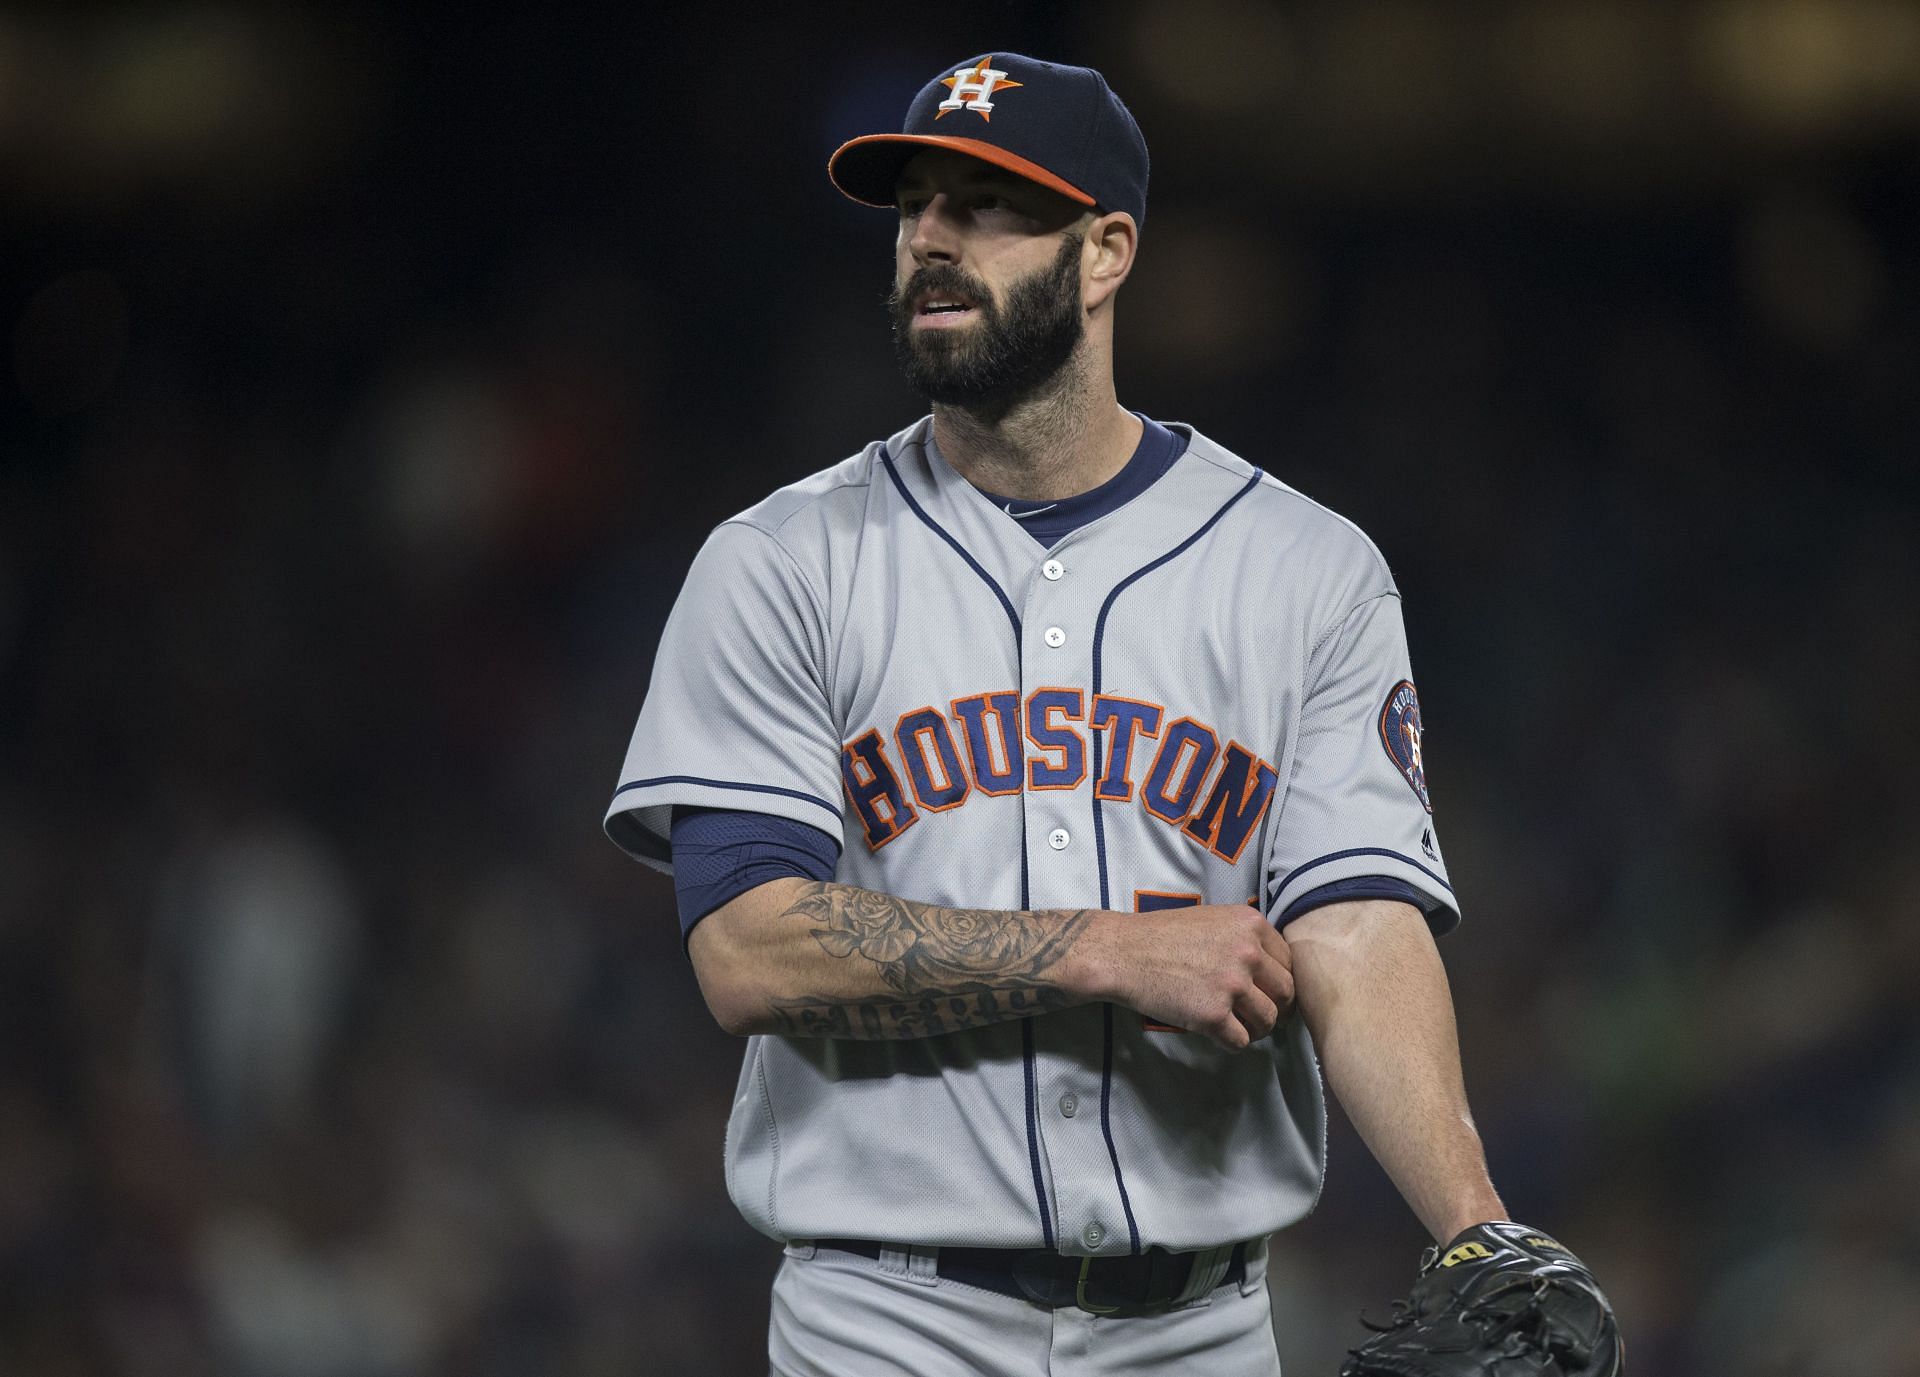 Houston Astros: When Mike Fiers refused to be intimidated by threats after  exposing the 2017 Houston Astros sign-stealing scandal